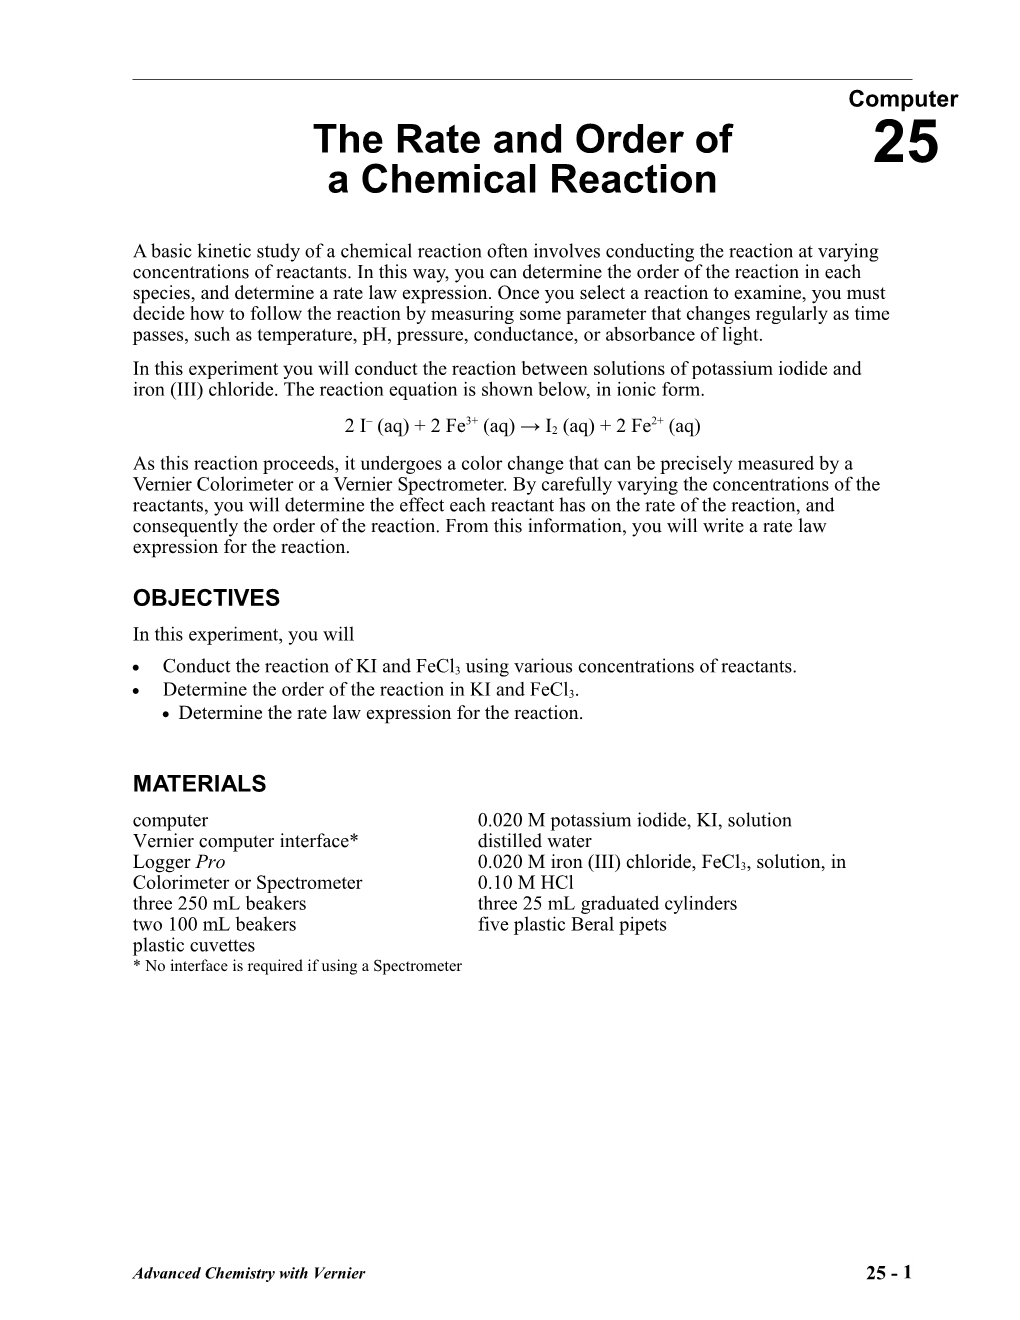 The Rate and Order of a Chemical Reaction